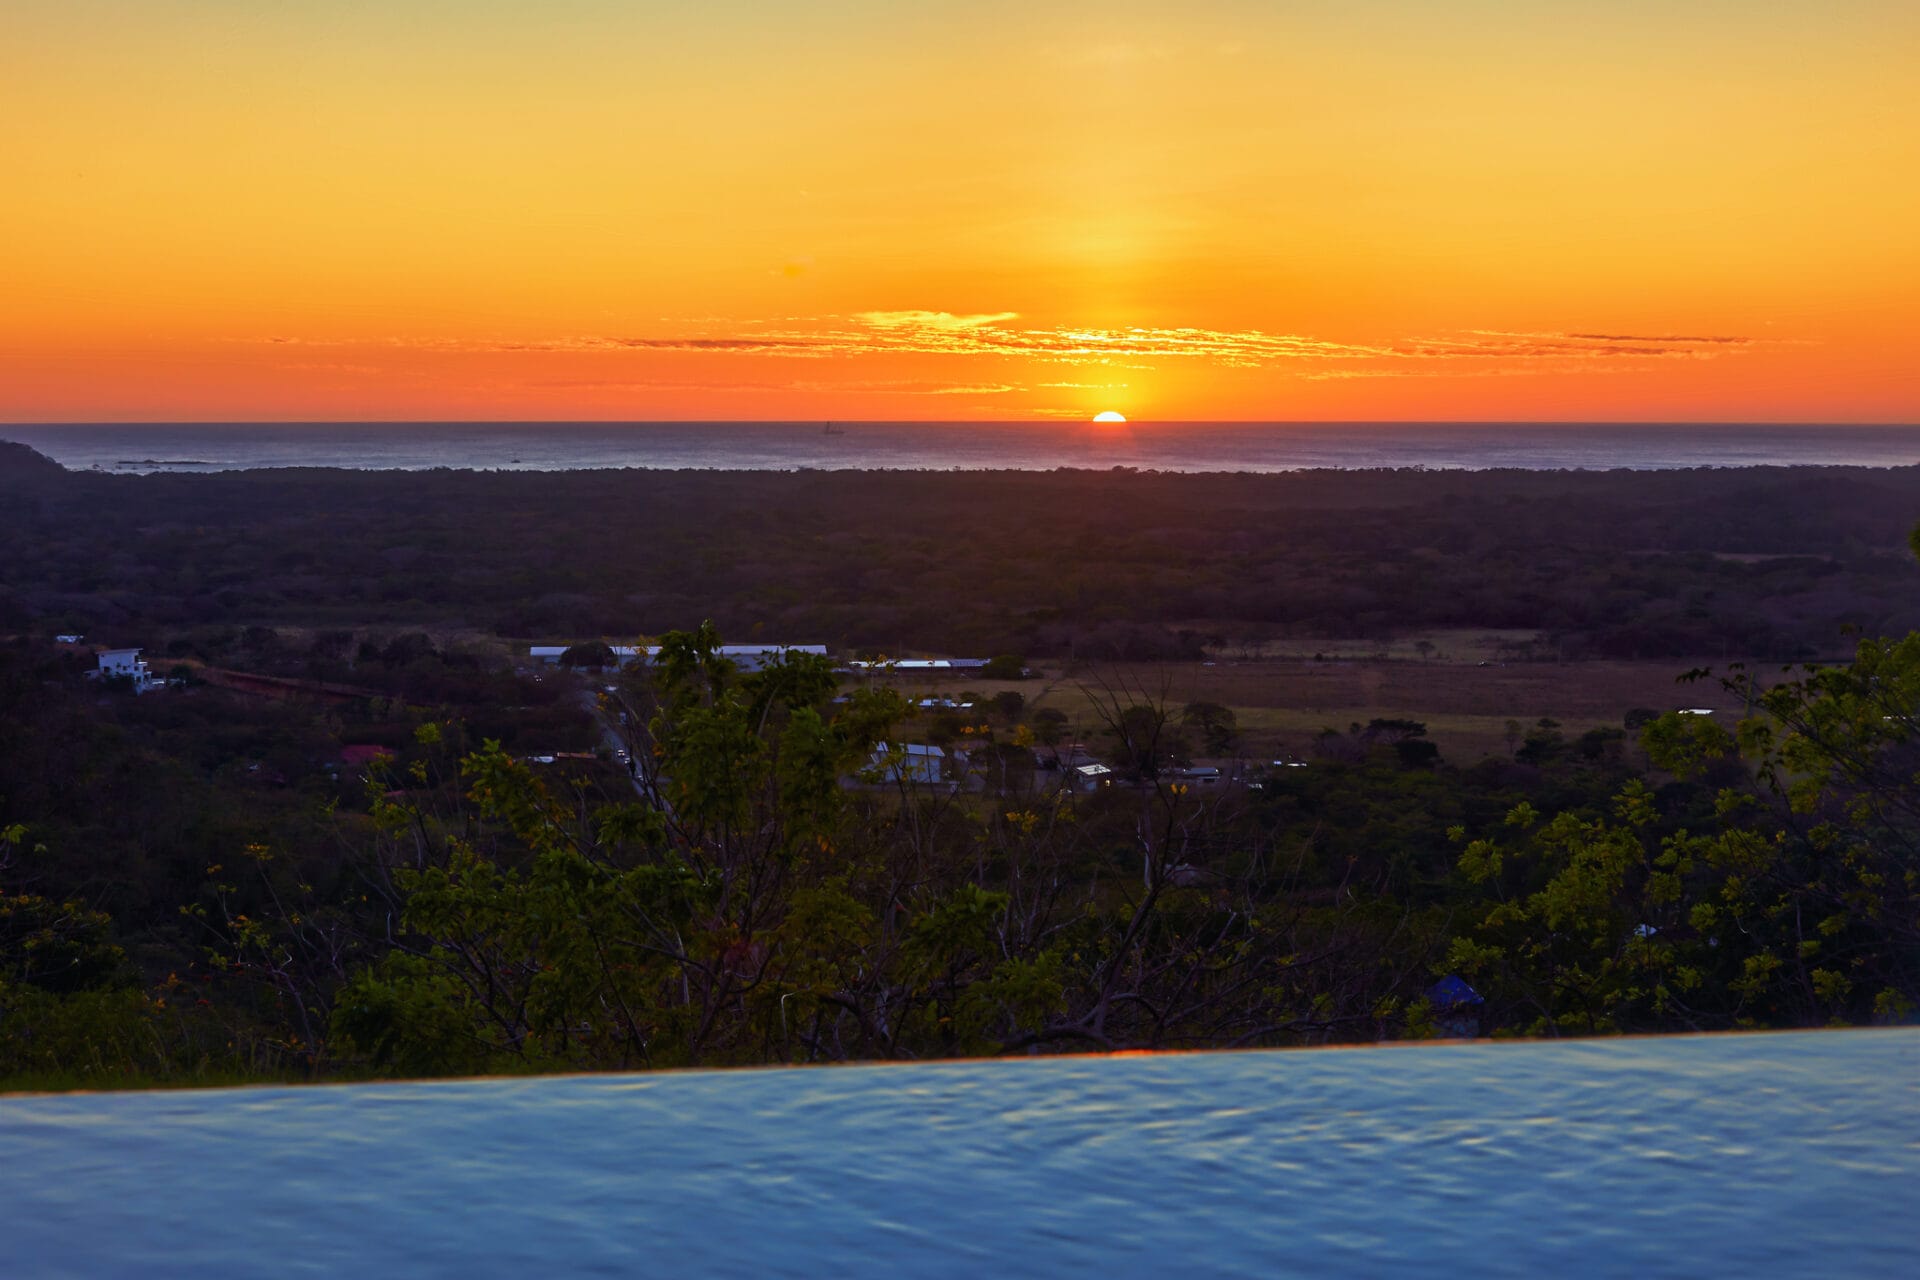 Mountain Oasis Retreat – 4+ Acre, Ocean-View Tamarindo Mountain Retreat with 7 one-bedroom units